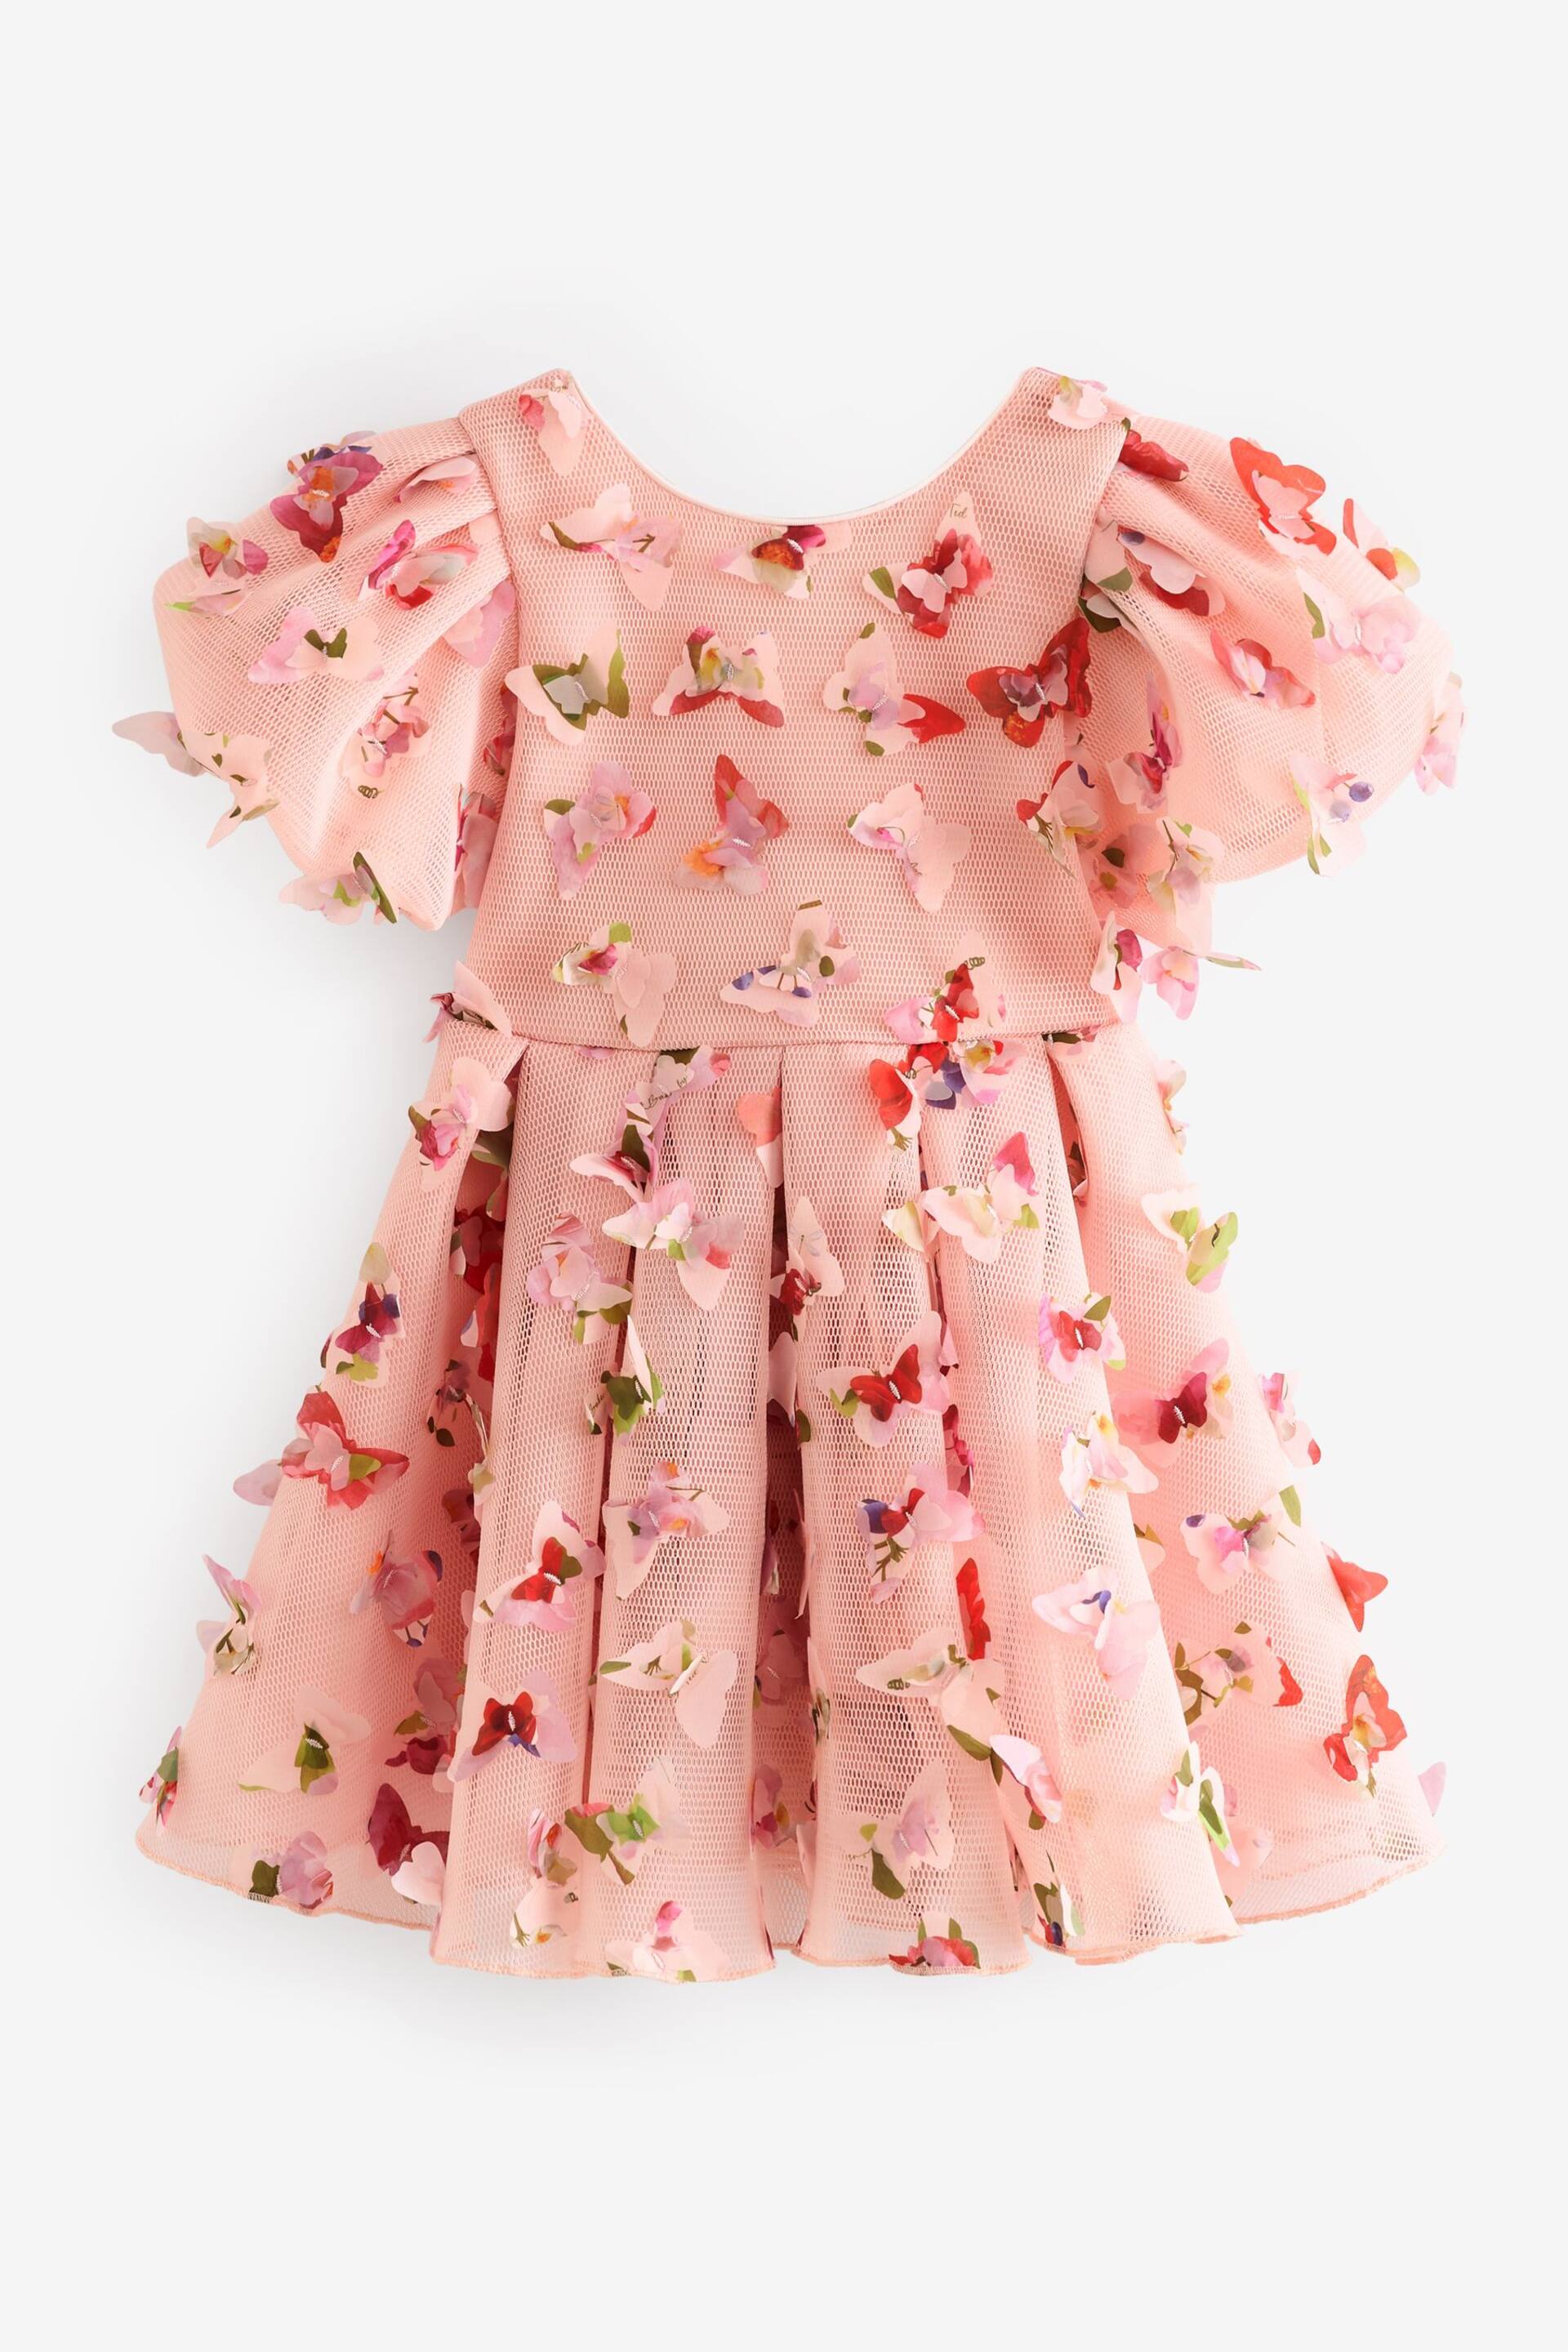 Baker by Ted Baker Pink 3D Butterfly Dress - Image 7 of 10